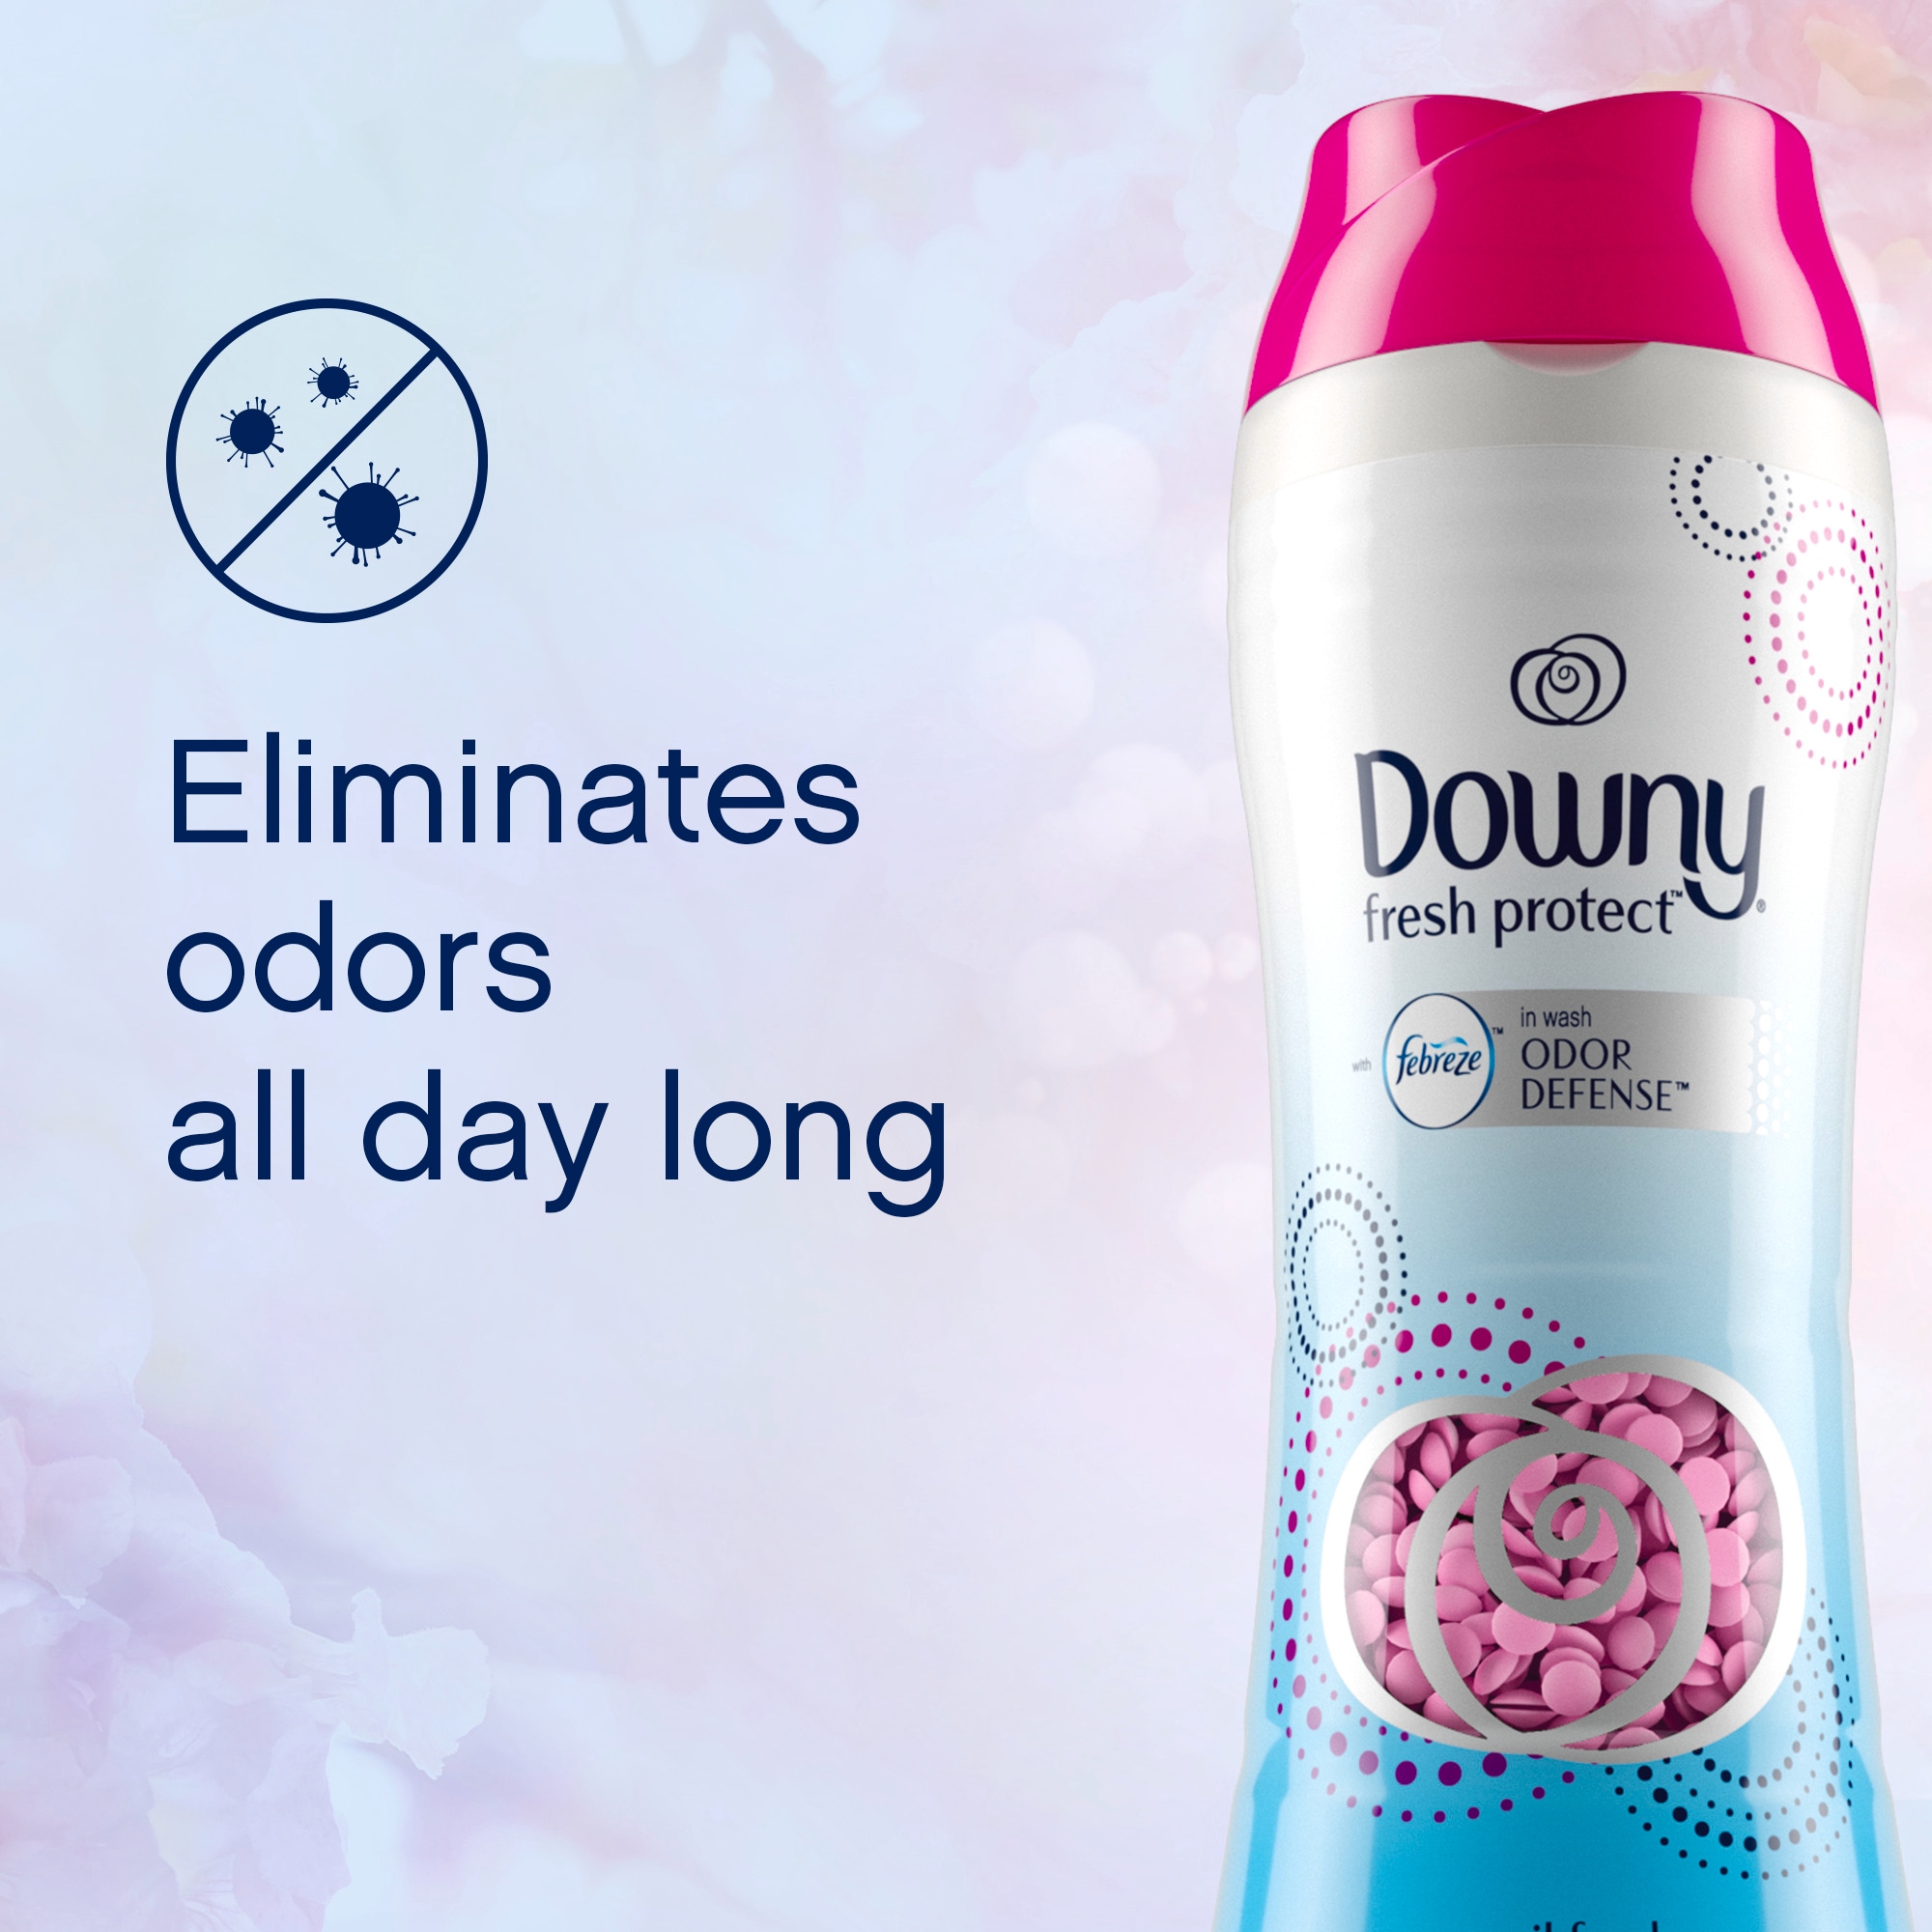 Downy Light Laundry Scent Booster Beads for Washer, 37.5 Oz.